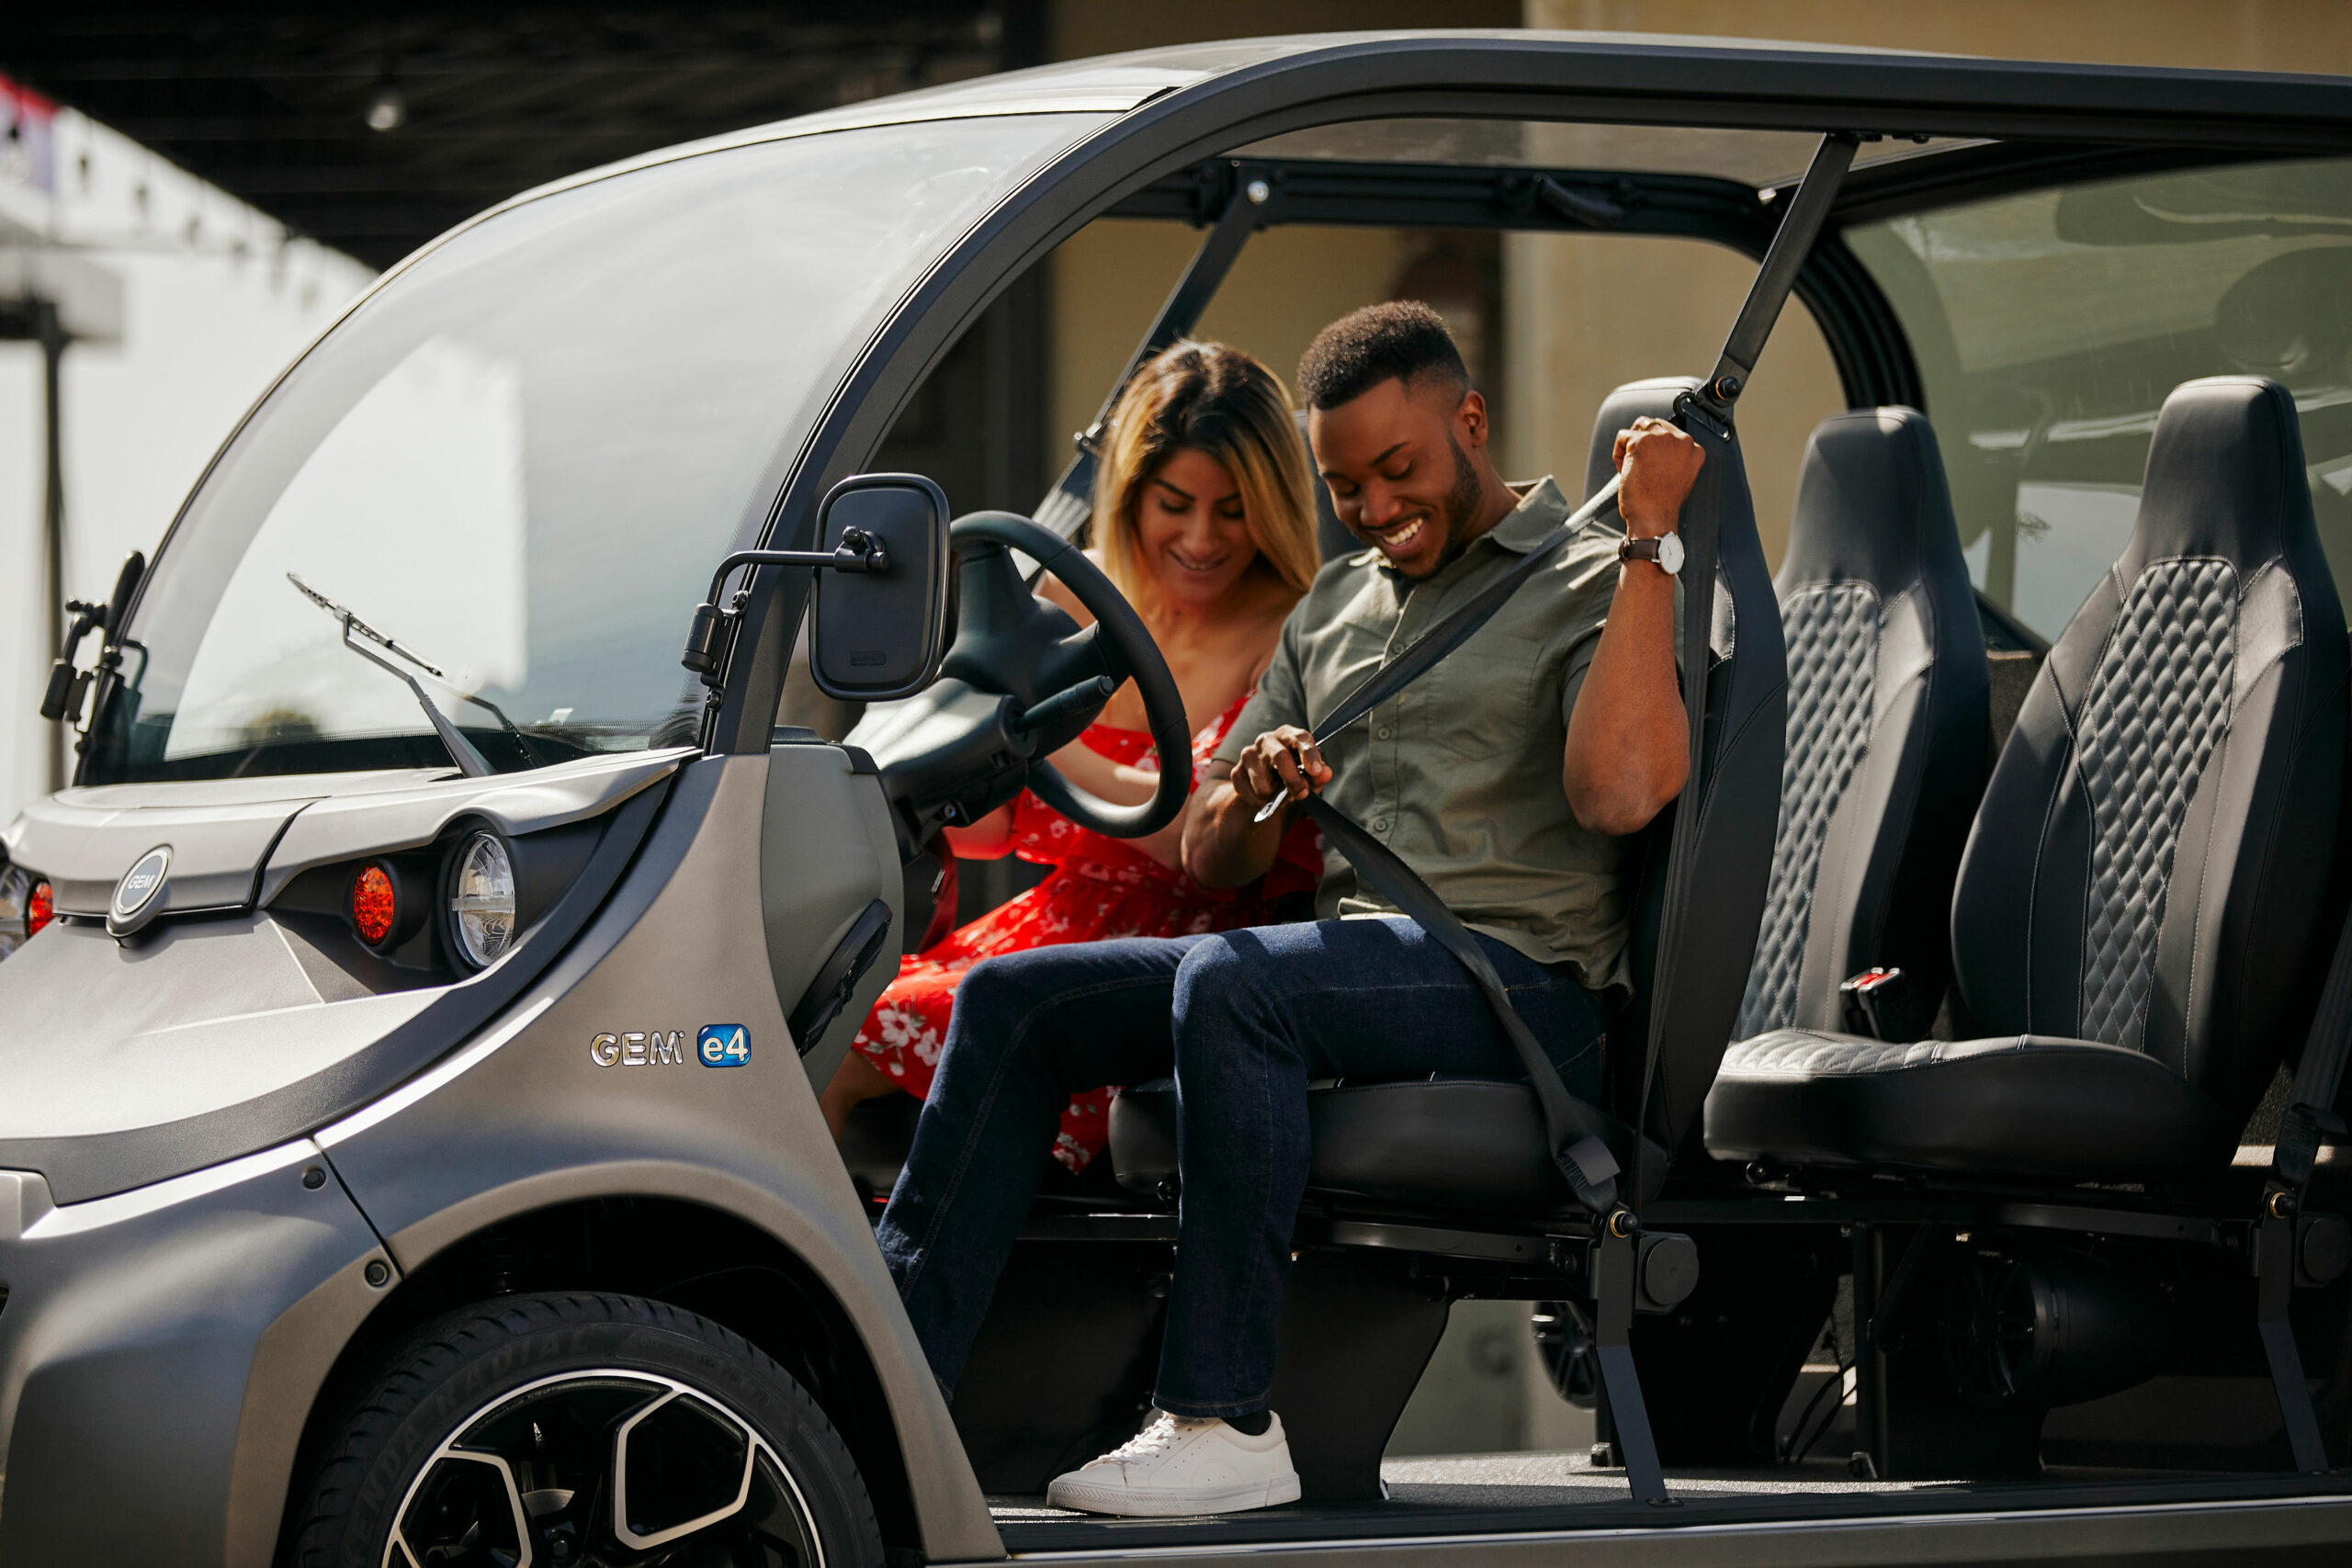 A man and a woman fastening their seatbelts in an electric vehicle